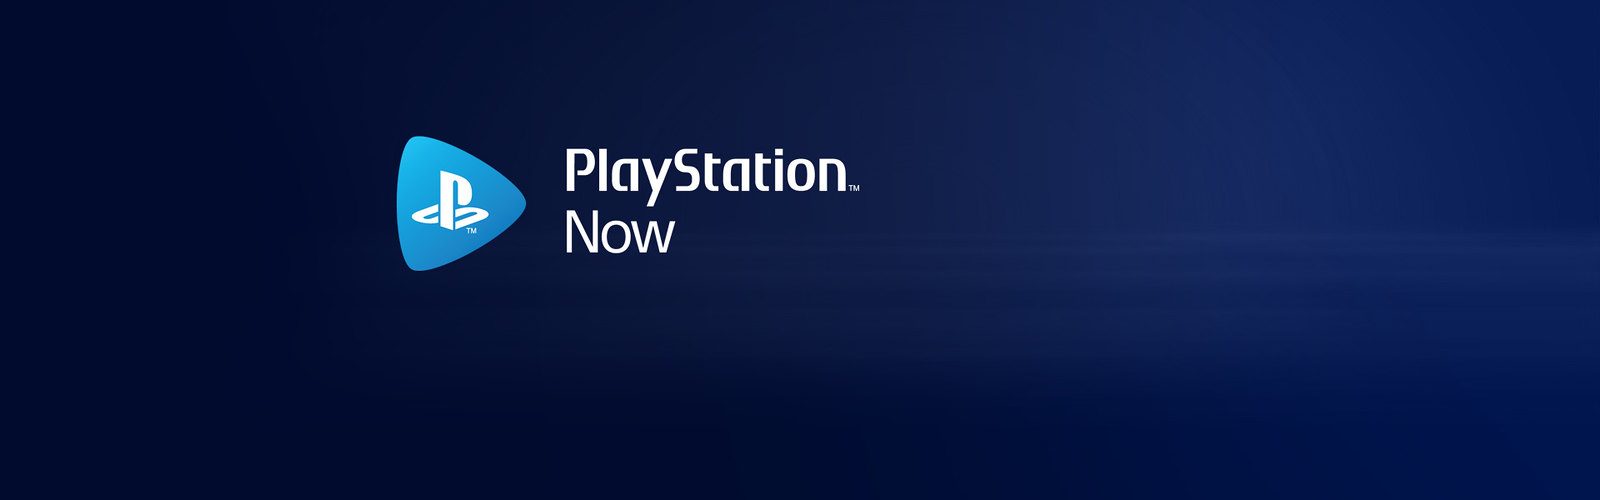 best coop games on playstation now